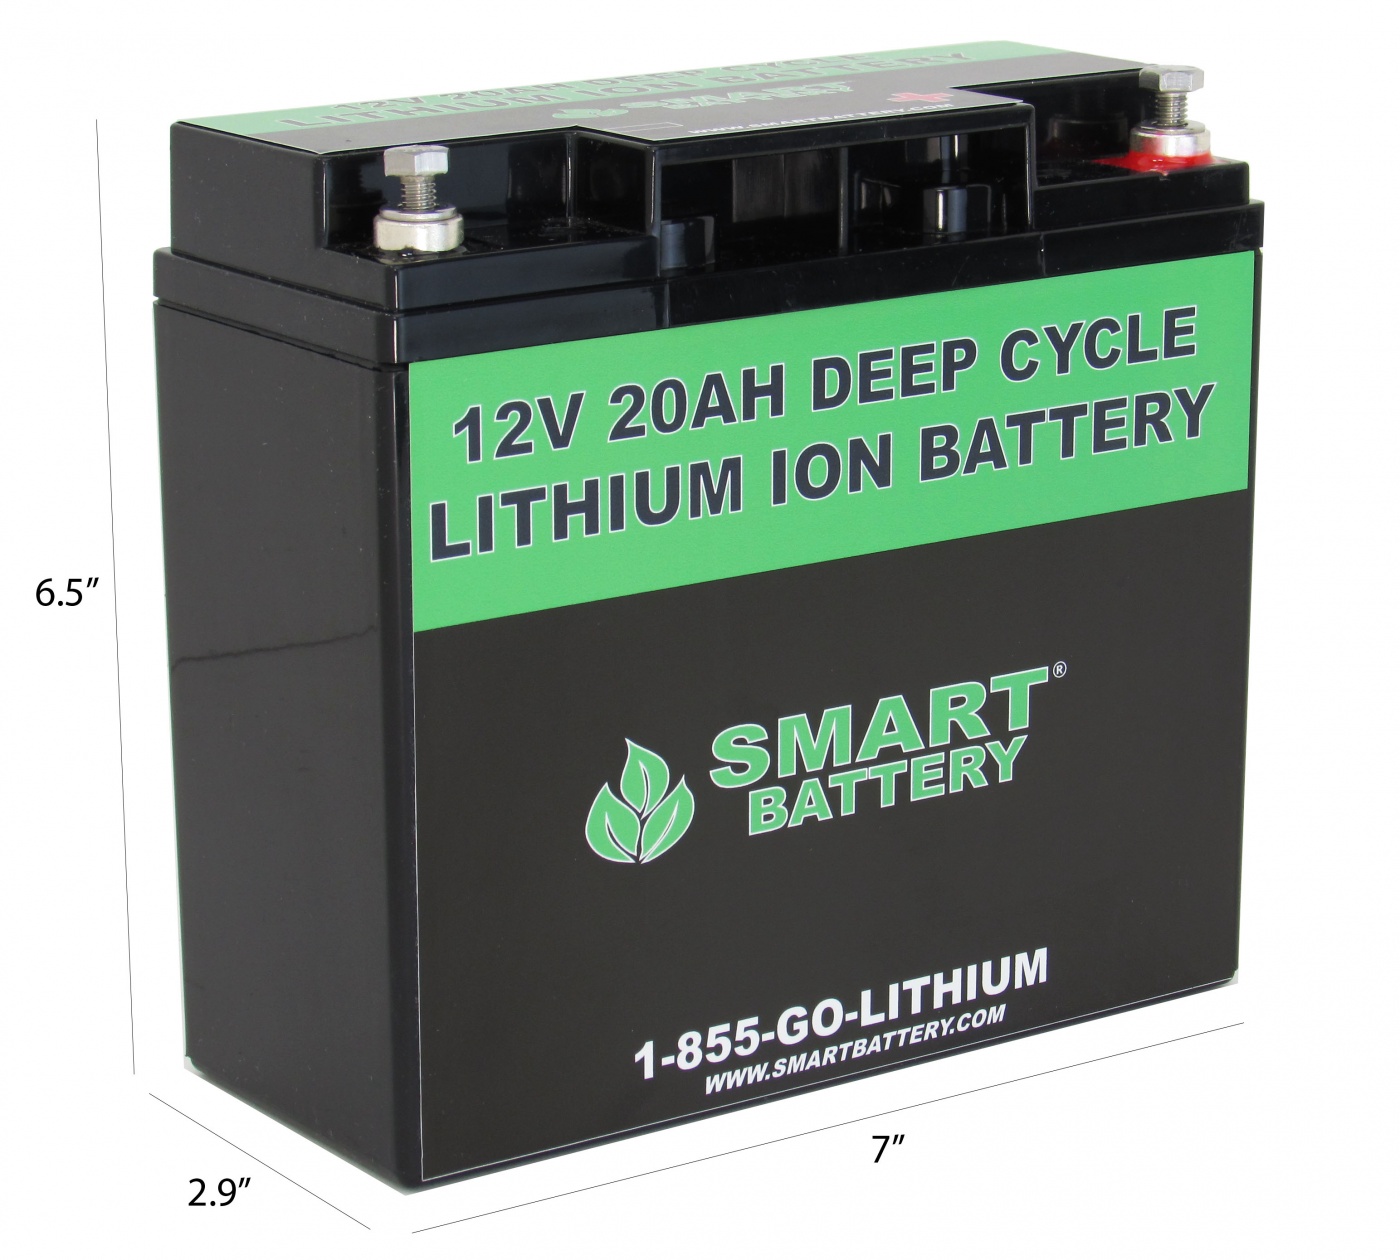 12V 20AH Lithium Ion Battery | Chargers and Voltmeters | Smart Battery